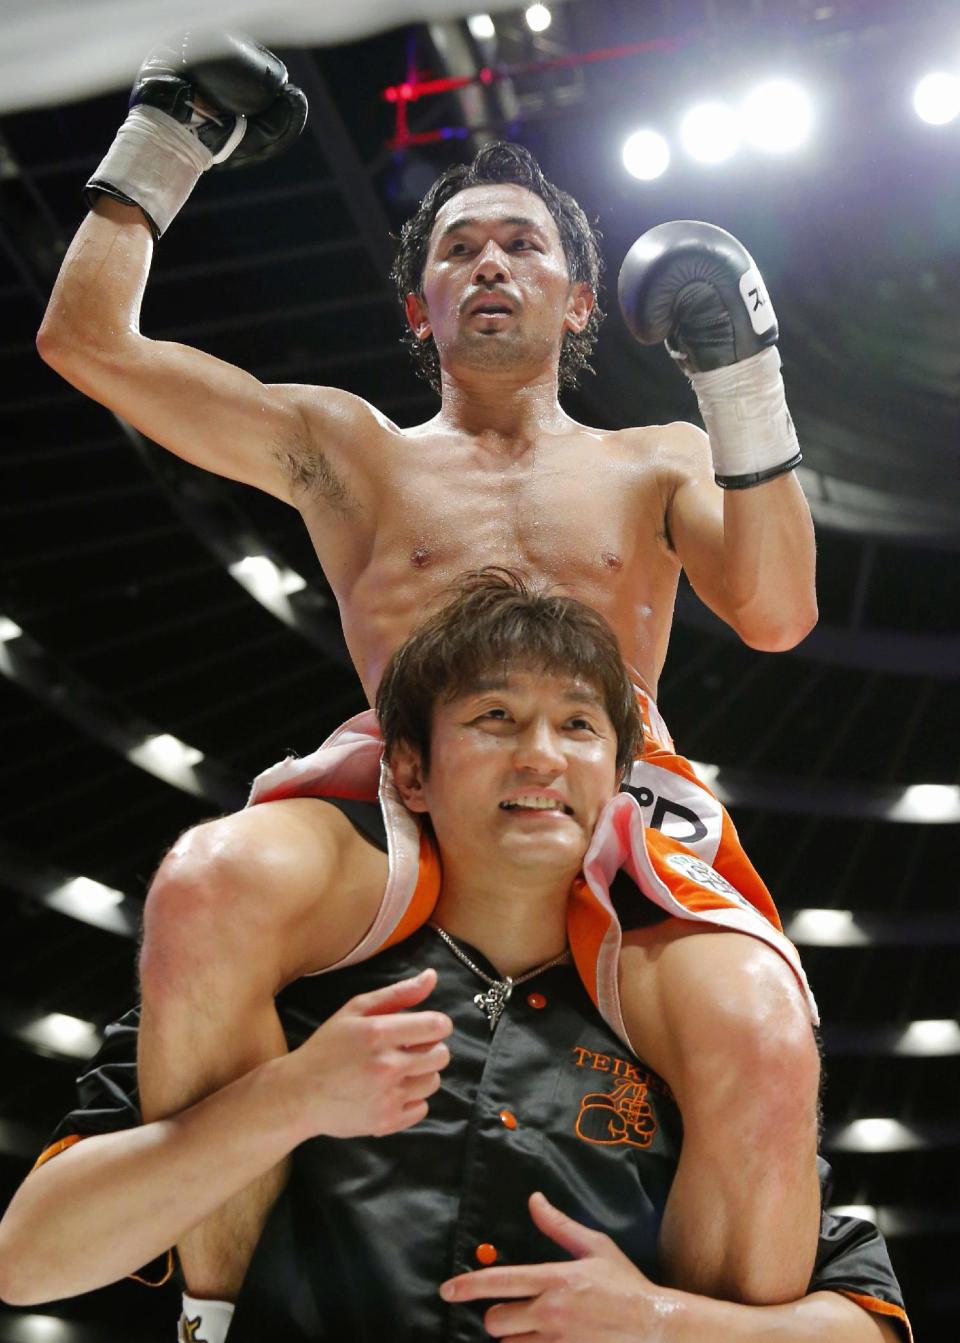 Japanese champion Shinsuke Yamanaka is carried on the shoulders of his corner's man after defeating Belgian challenger Stephane Jamoye in their WBC bantamweight boxing title bout in Osaka, western Japan, Wednesday, April 23, 2014. Yamanaka defended his title with a technical knockout in the ninth round. (AP Photo/Kyodo News) JAPAN OUT, CREDIT MANDATORY